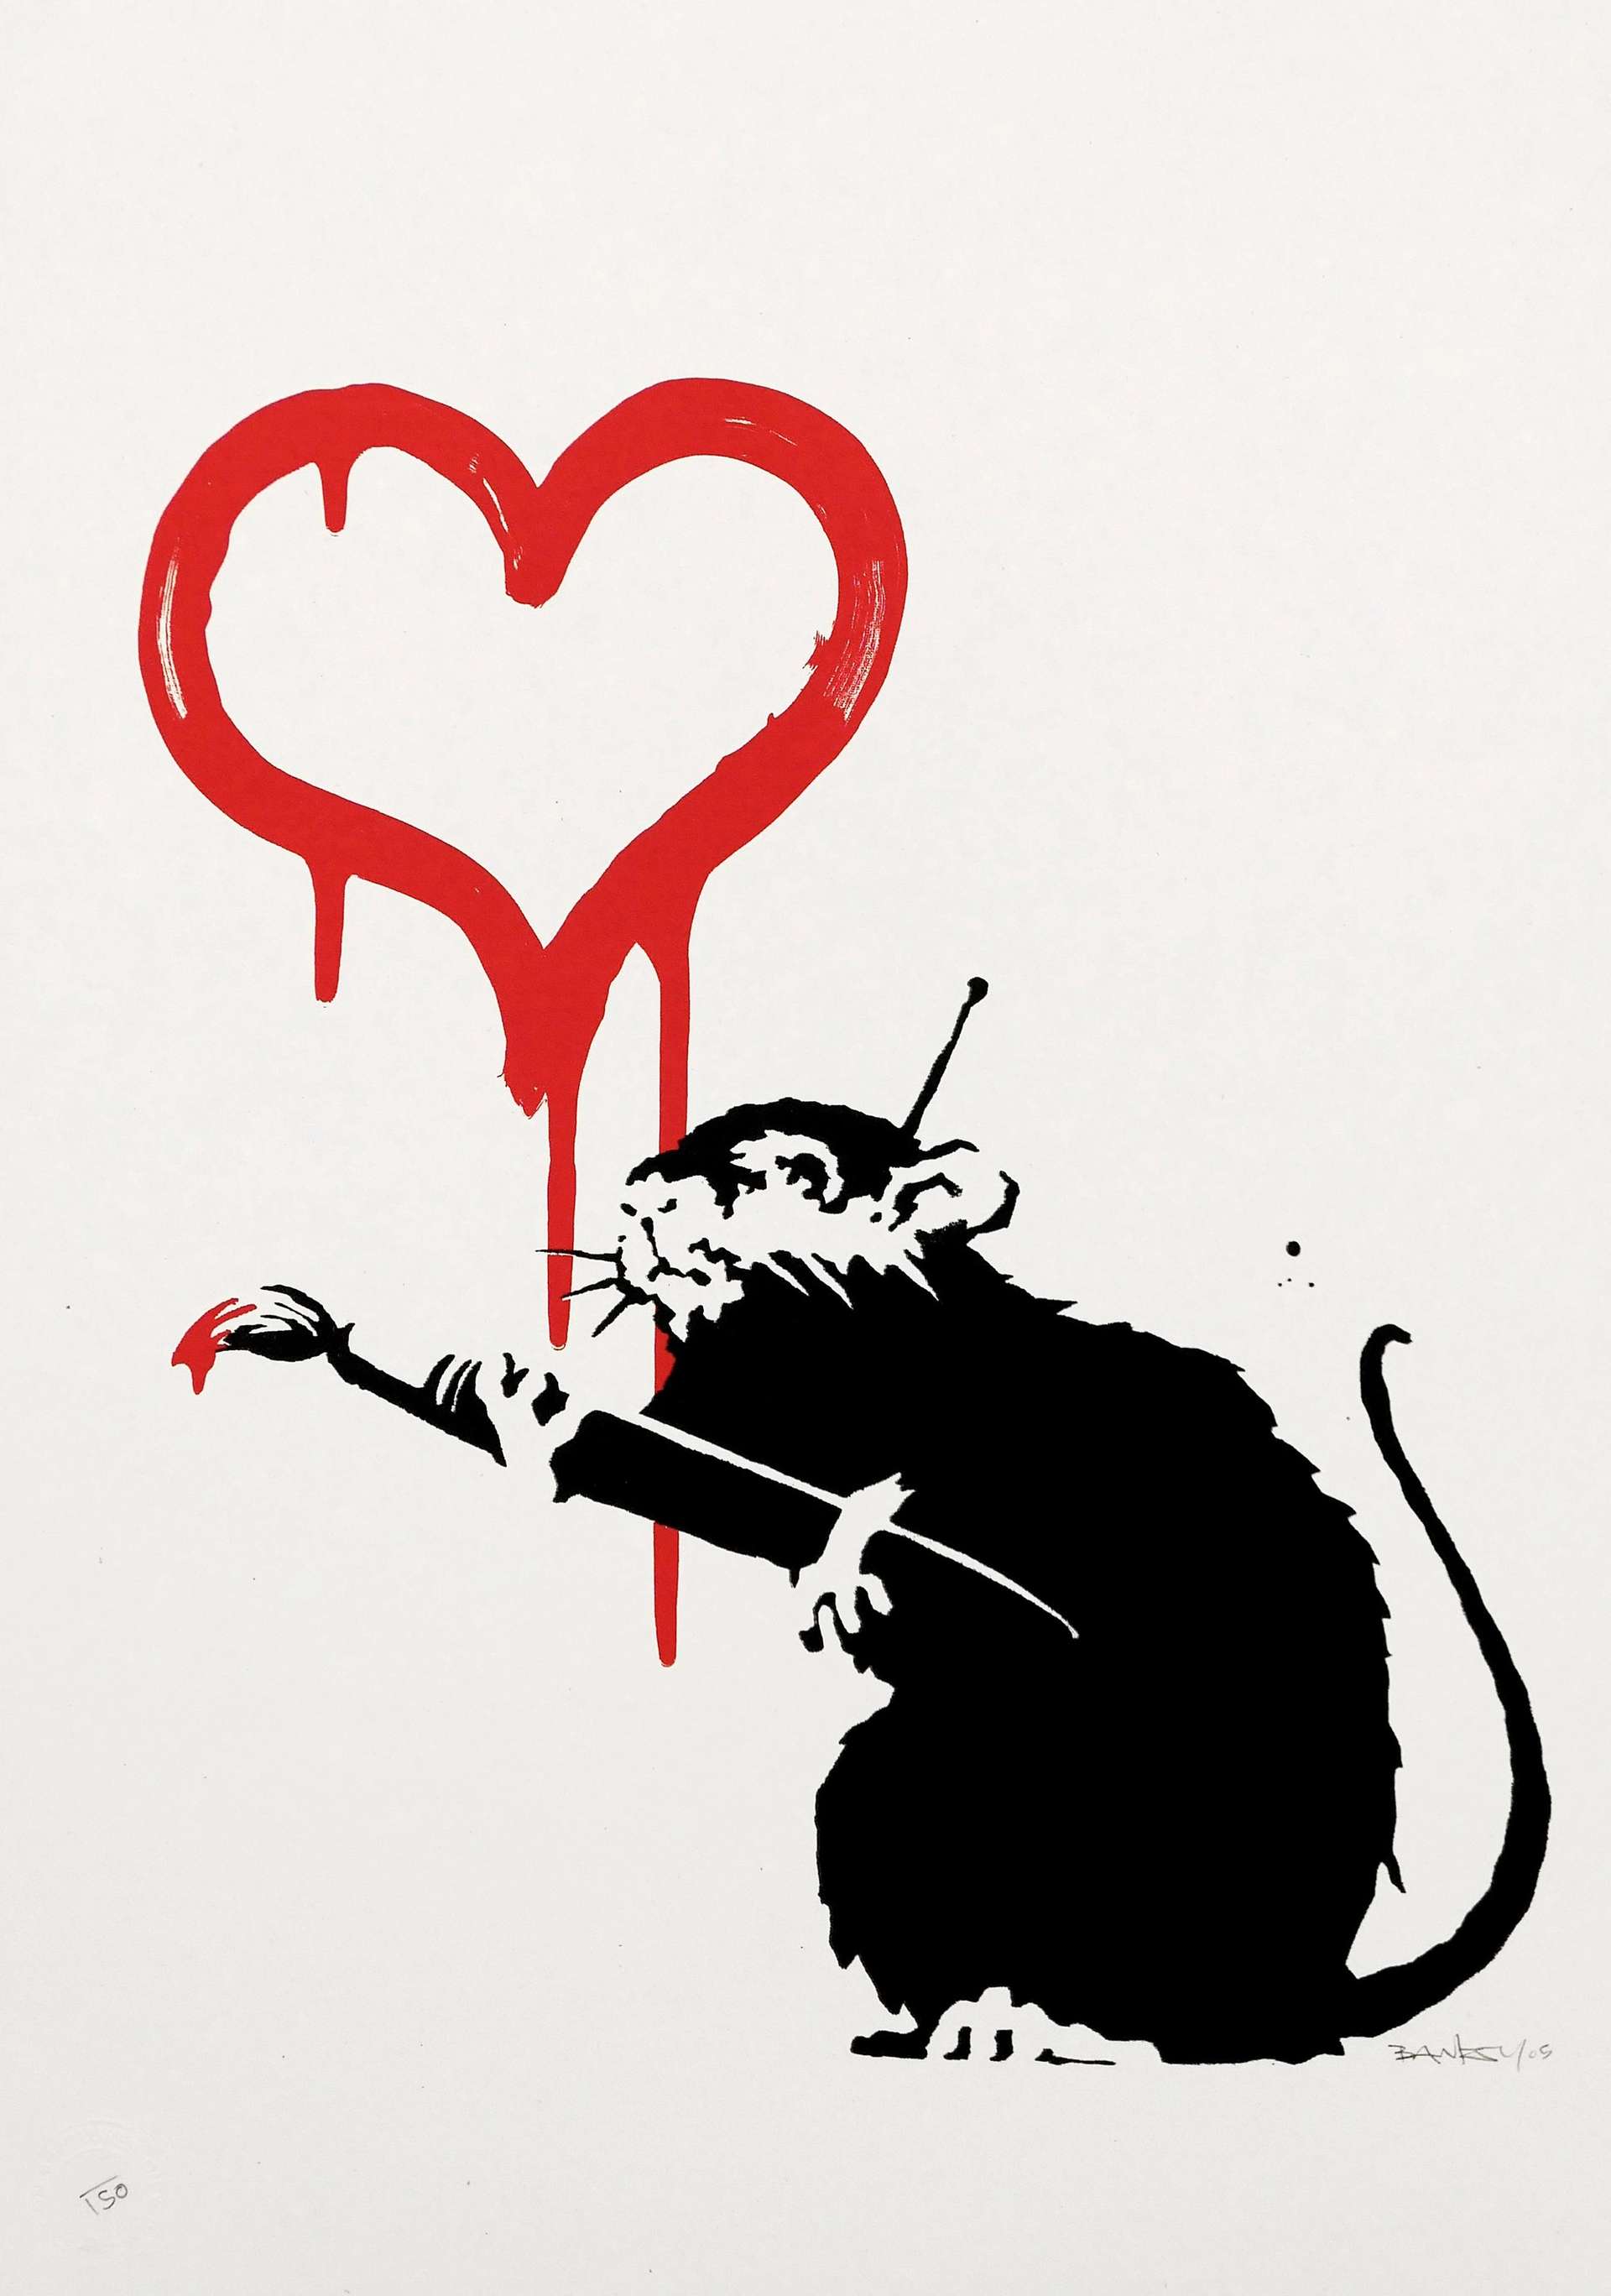 A screenprint by Banksy depicting a rat painting a heart in red paint.